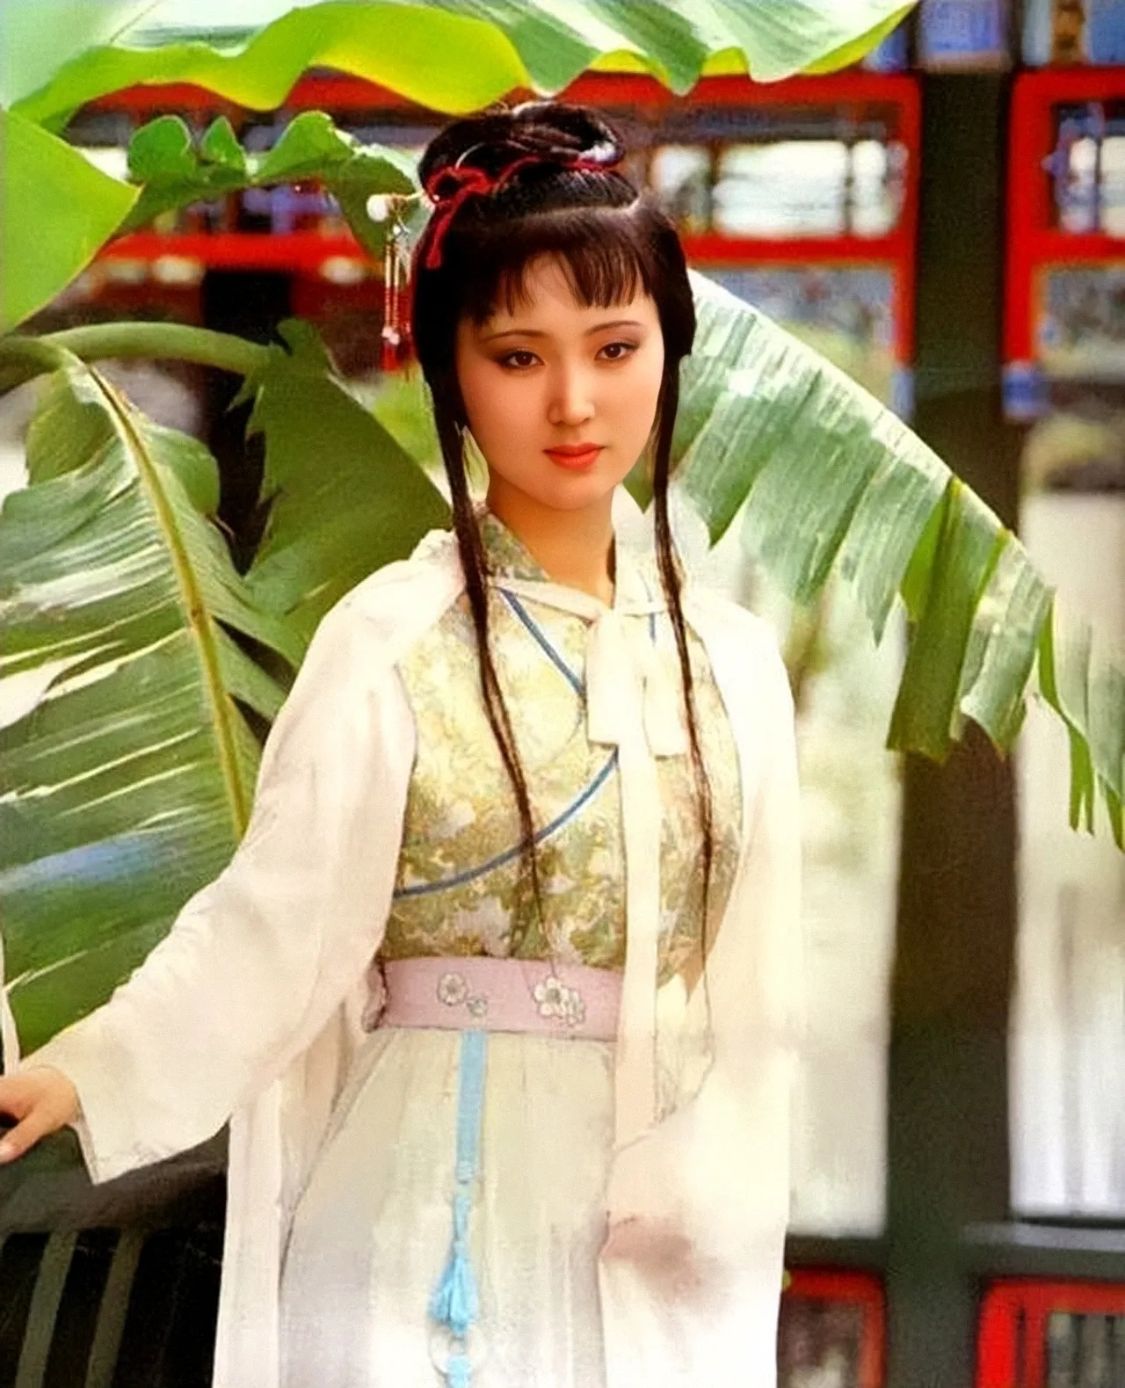 Dongfang Wenying starred in 